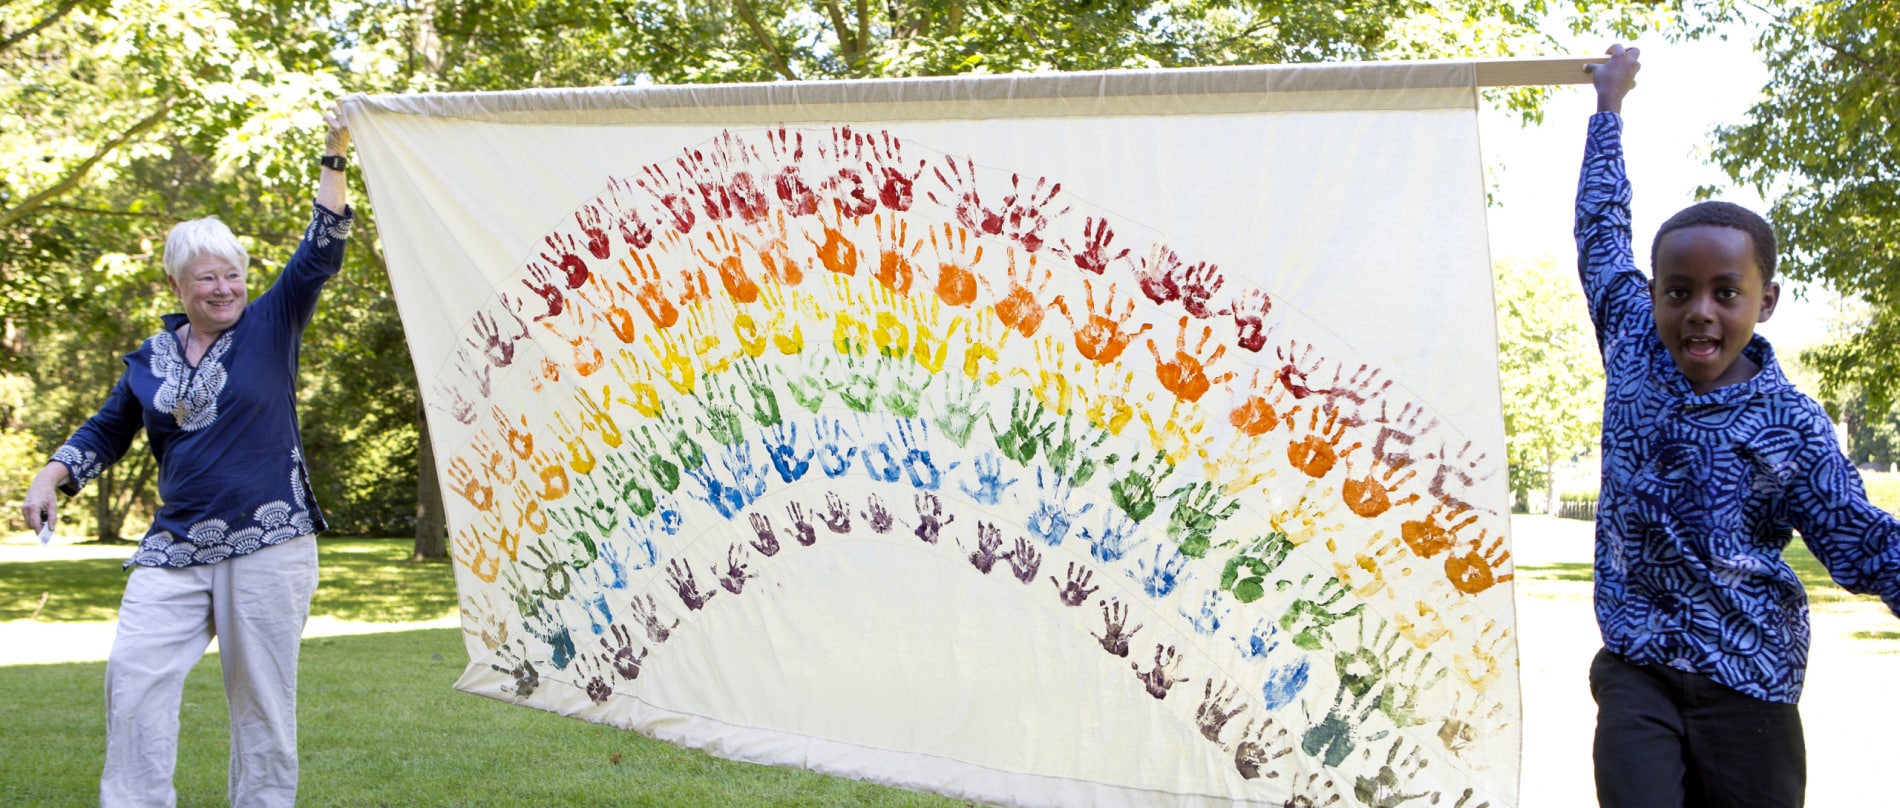 A middle-aged woman and a young African American boy hold up a rainbow banner made with children's hand prints.